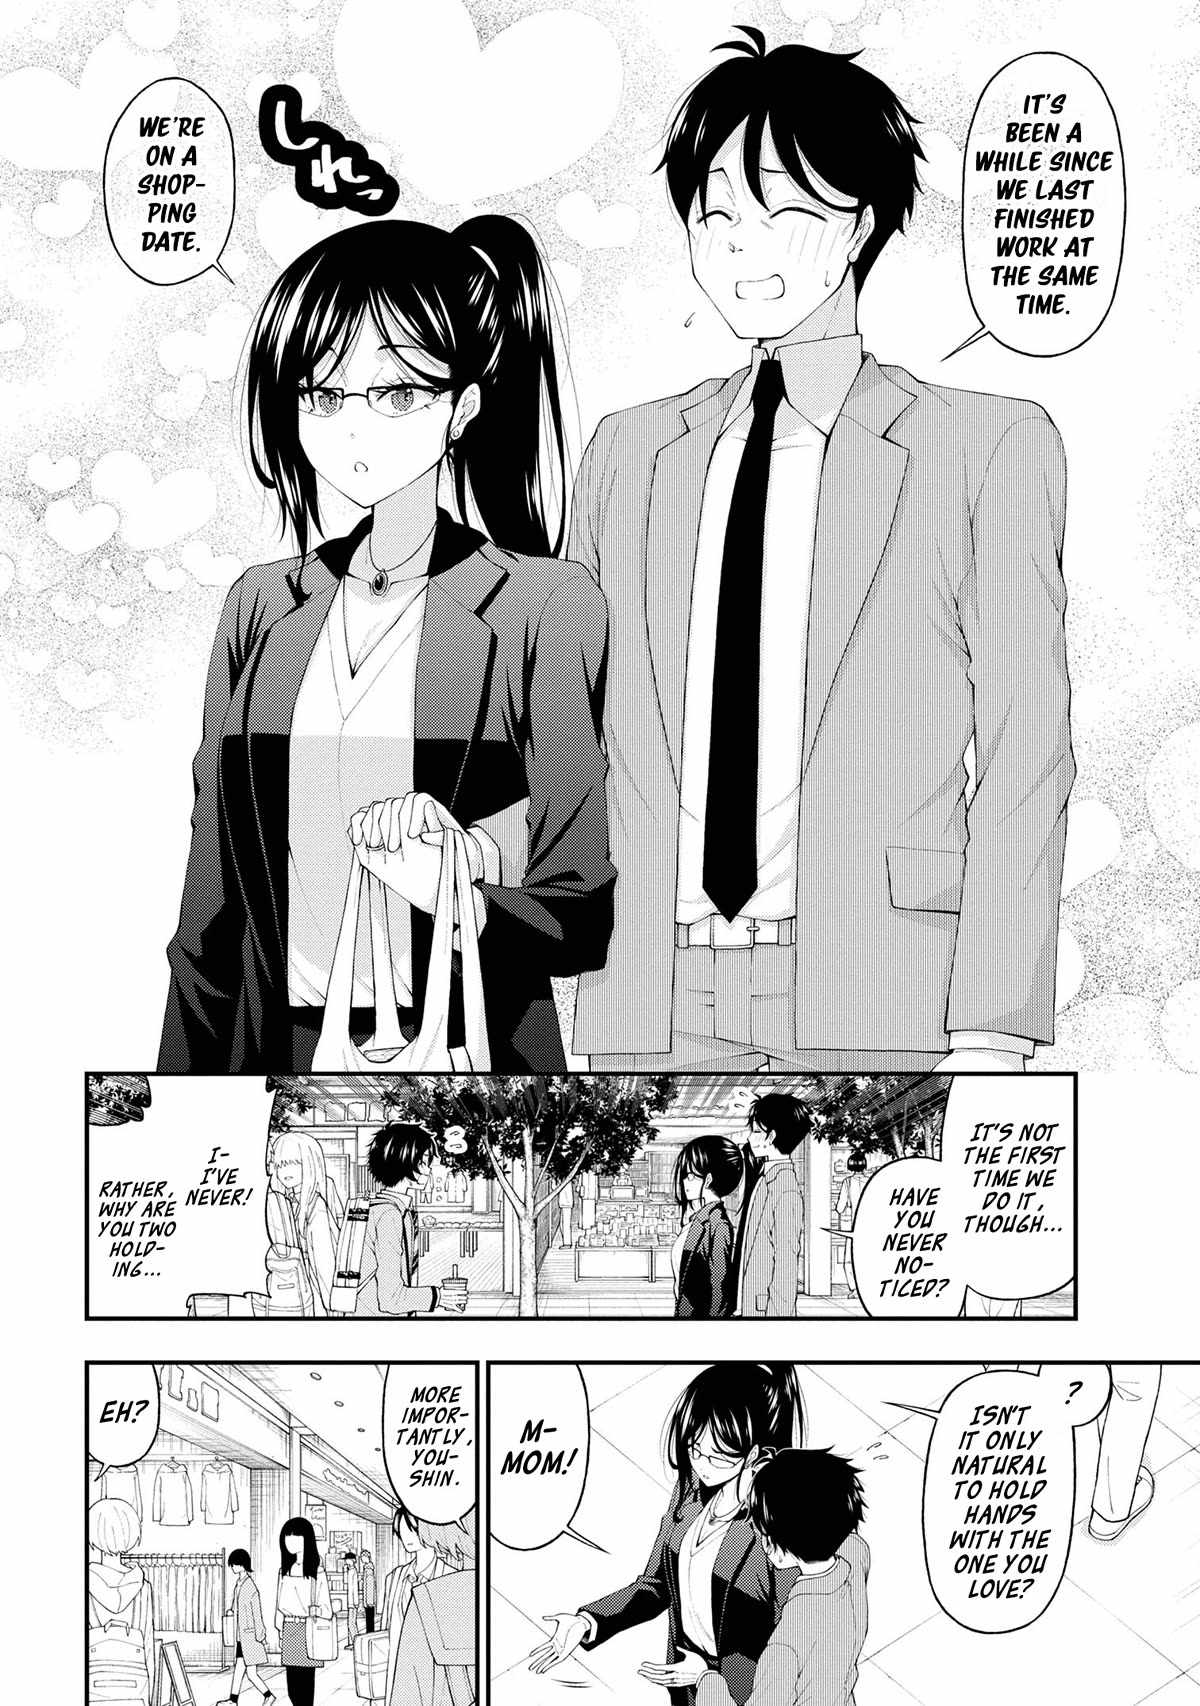 The Gal Who Was Meant to Confess to Me as a Game Punishment Has Apparently Fallen in Love with Me Chapter 14-eng-li - Page 13